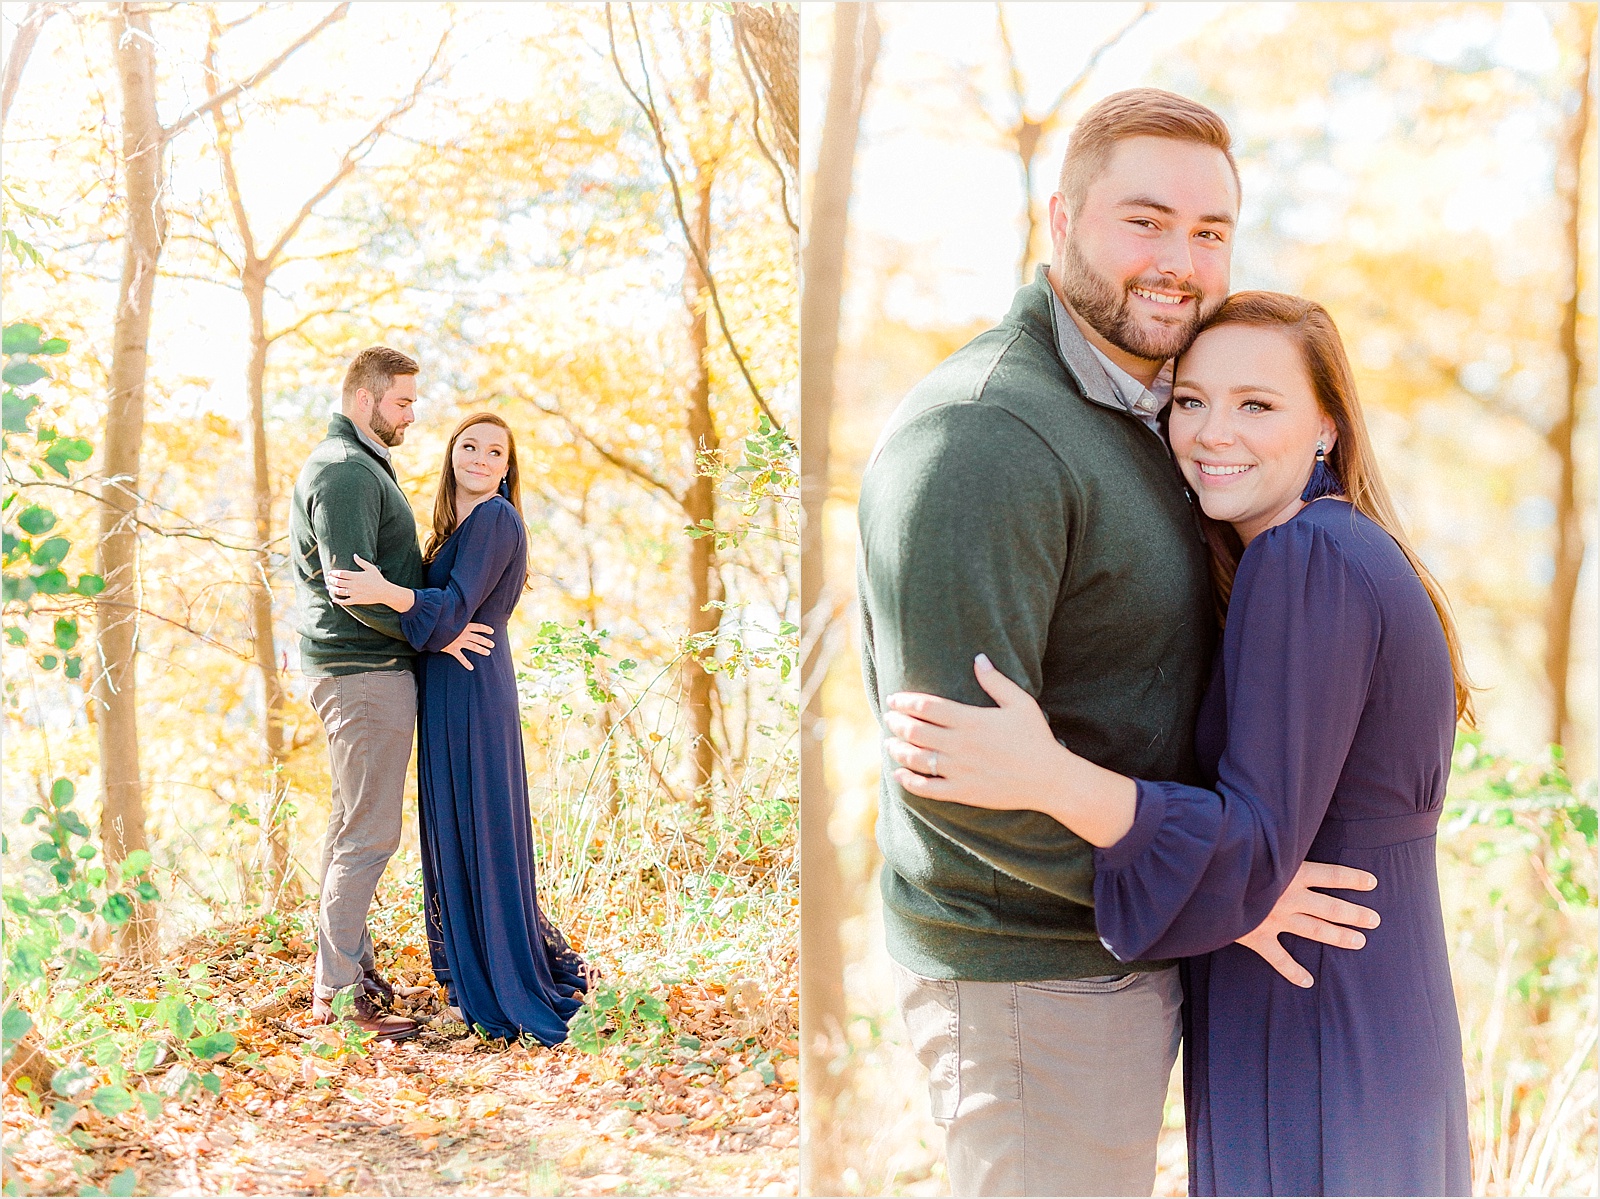 Wrightsville PA Engagement Photographer